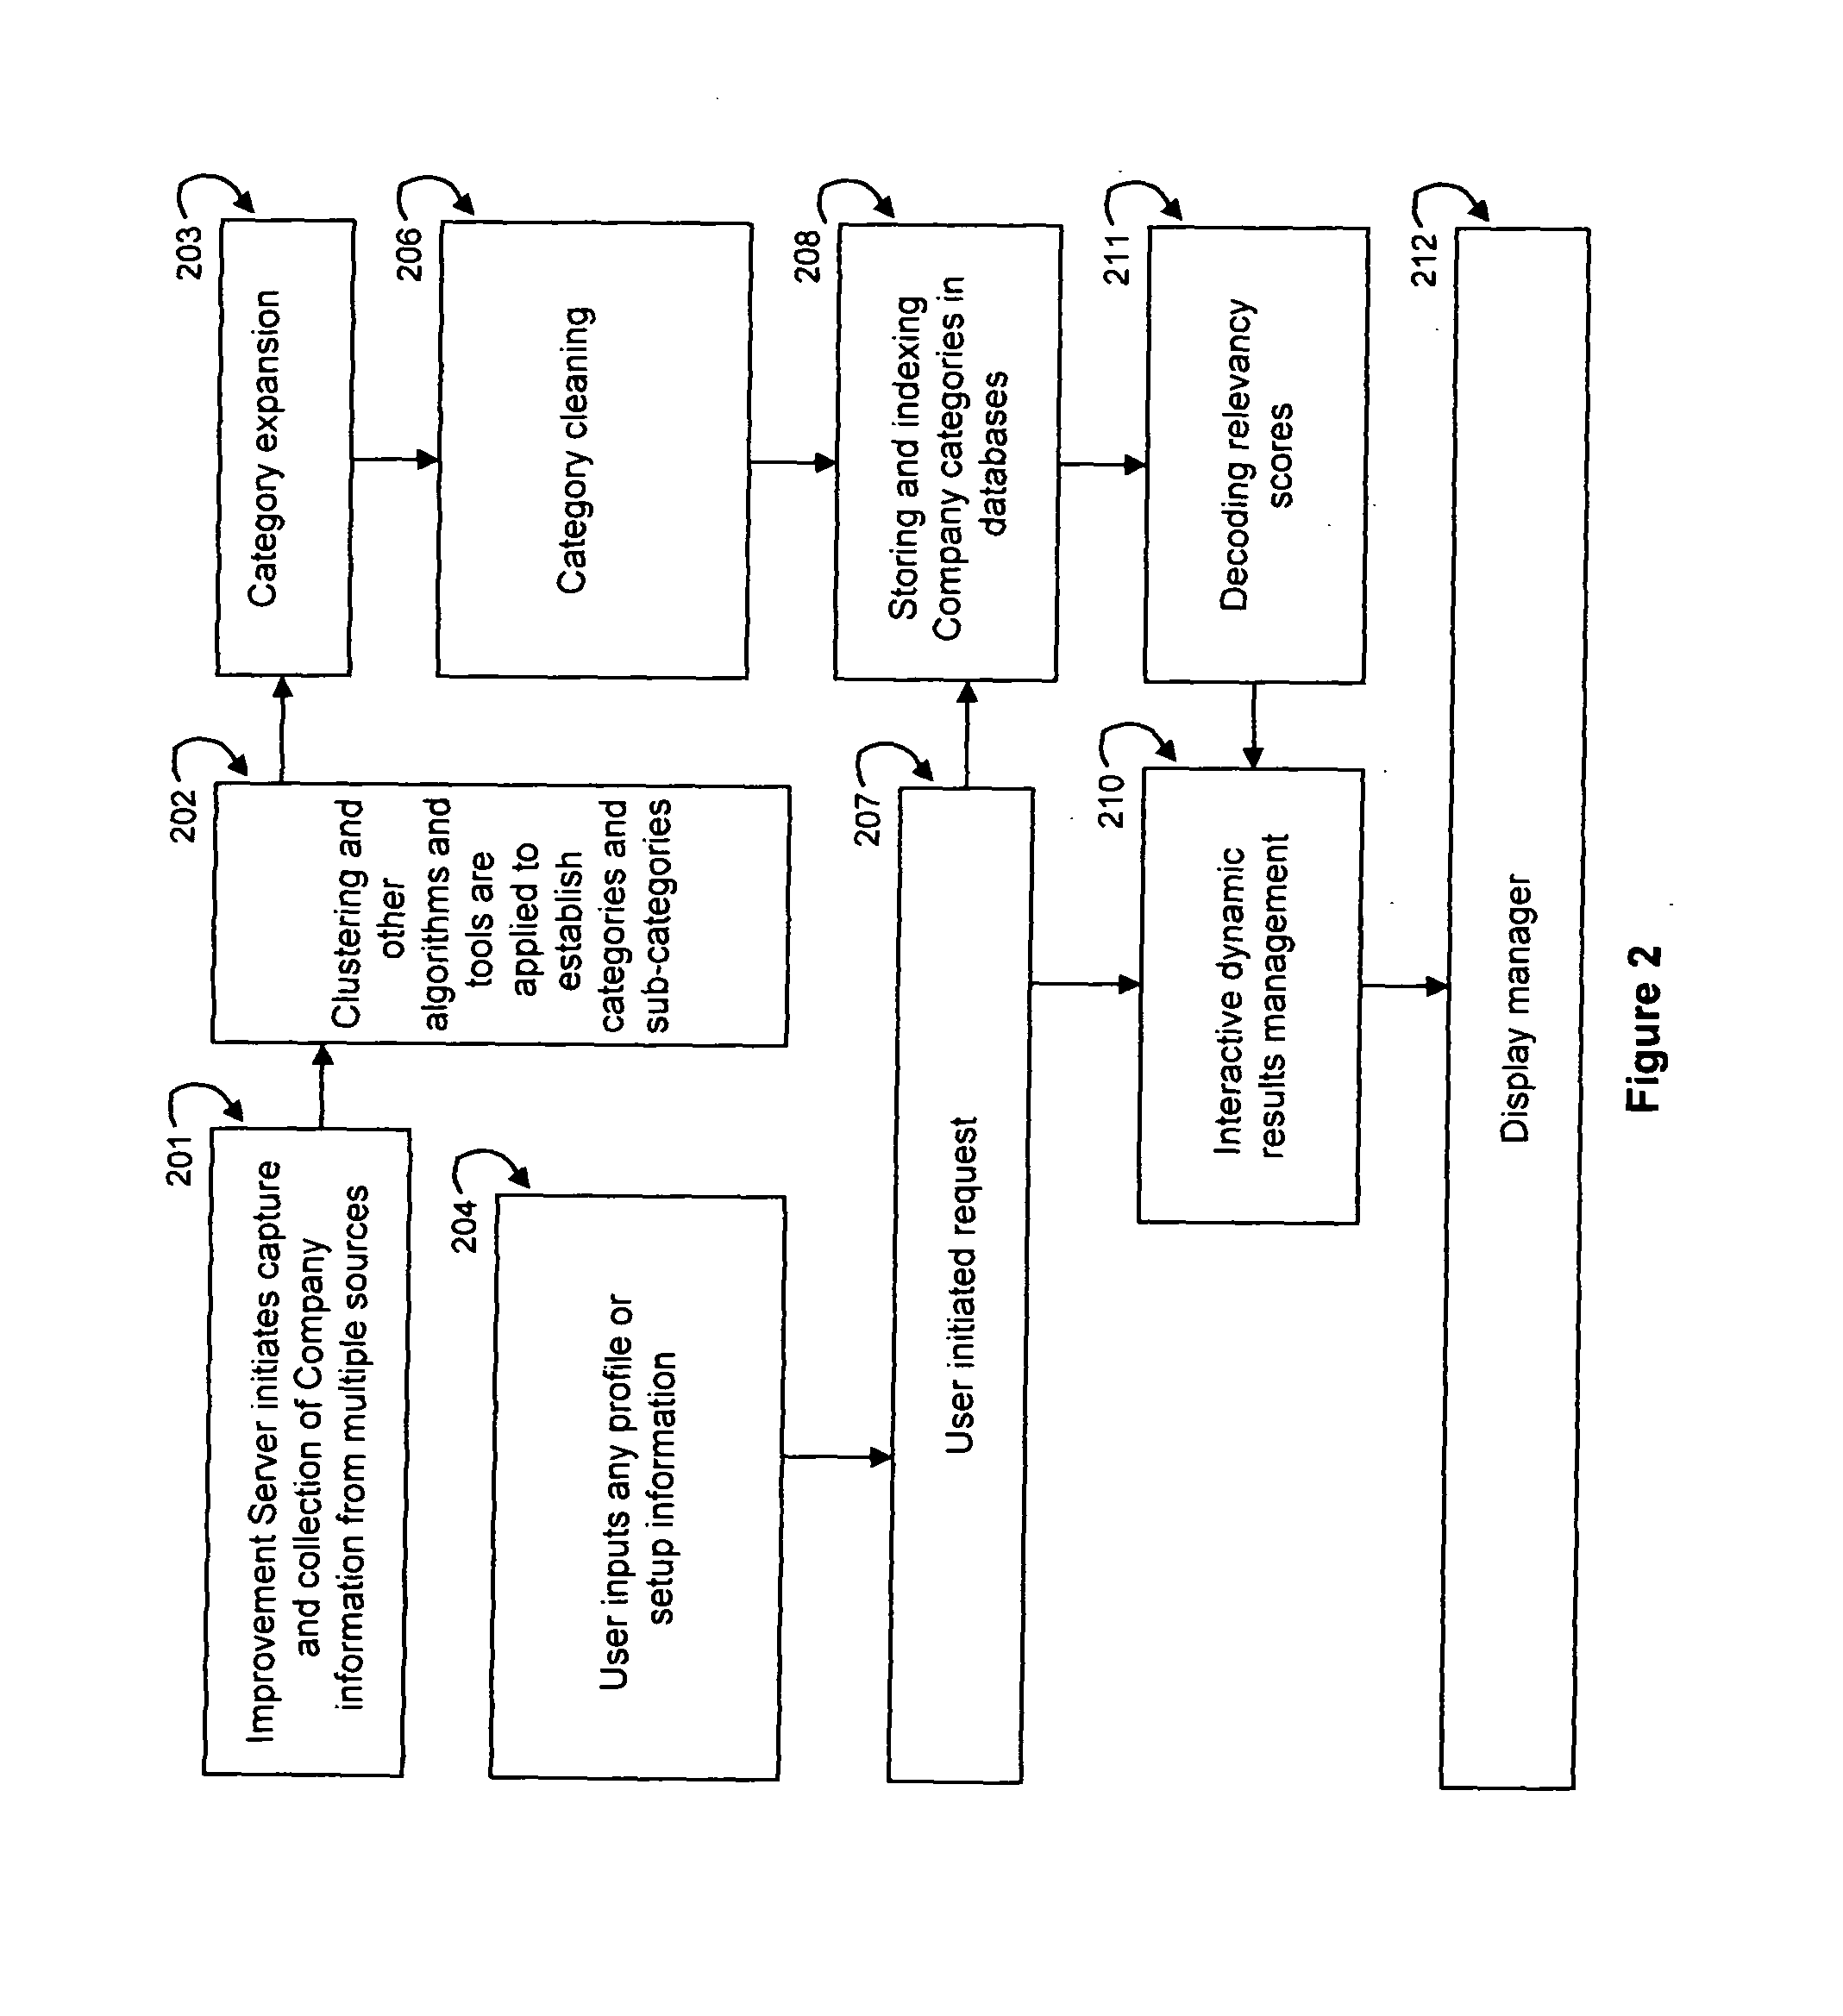 Method and system for improving interaction between participants of online networks